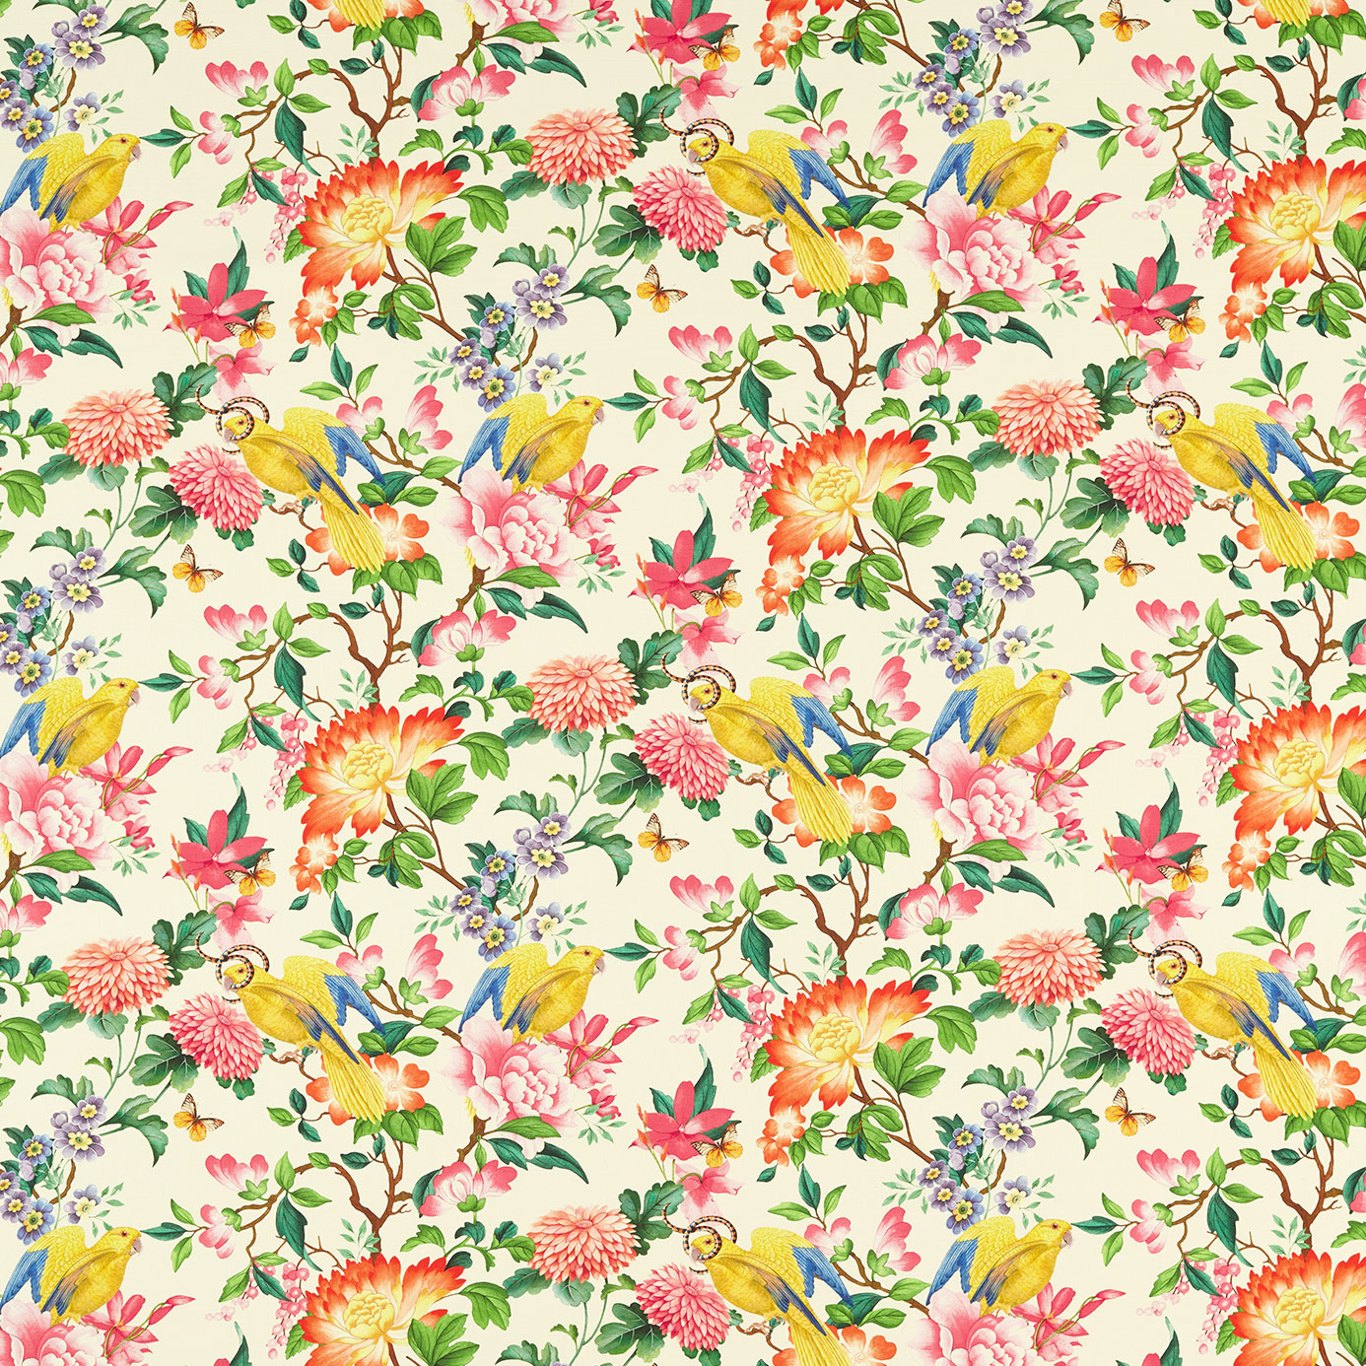 Golden Parrot Fabric by Wedgwood